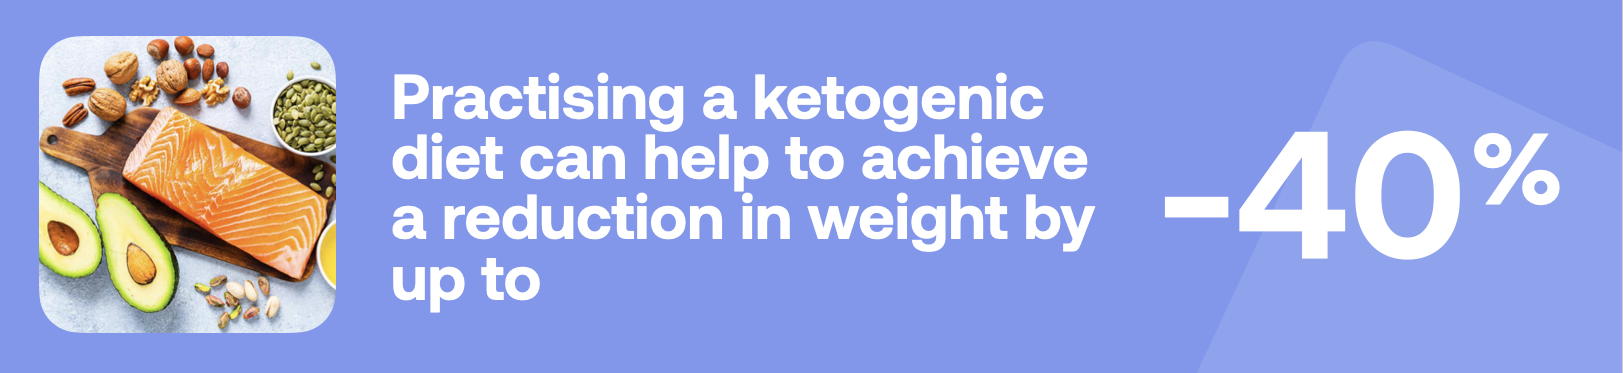 Practising a ketogenic diet can help to achive a reduction in weight by up to -40%